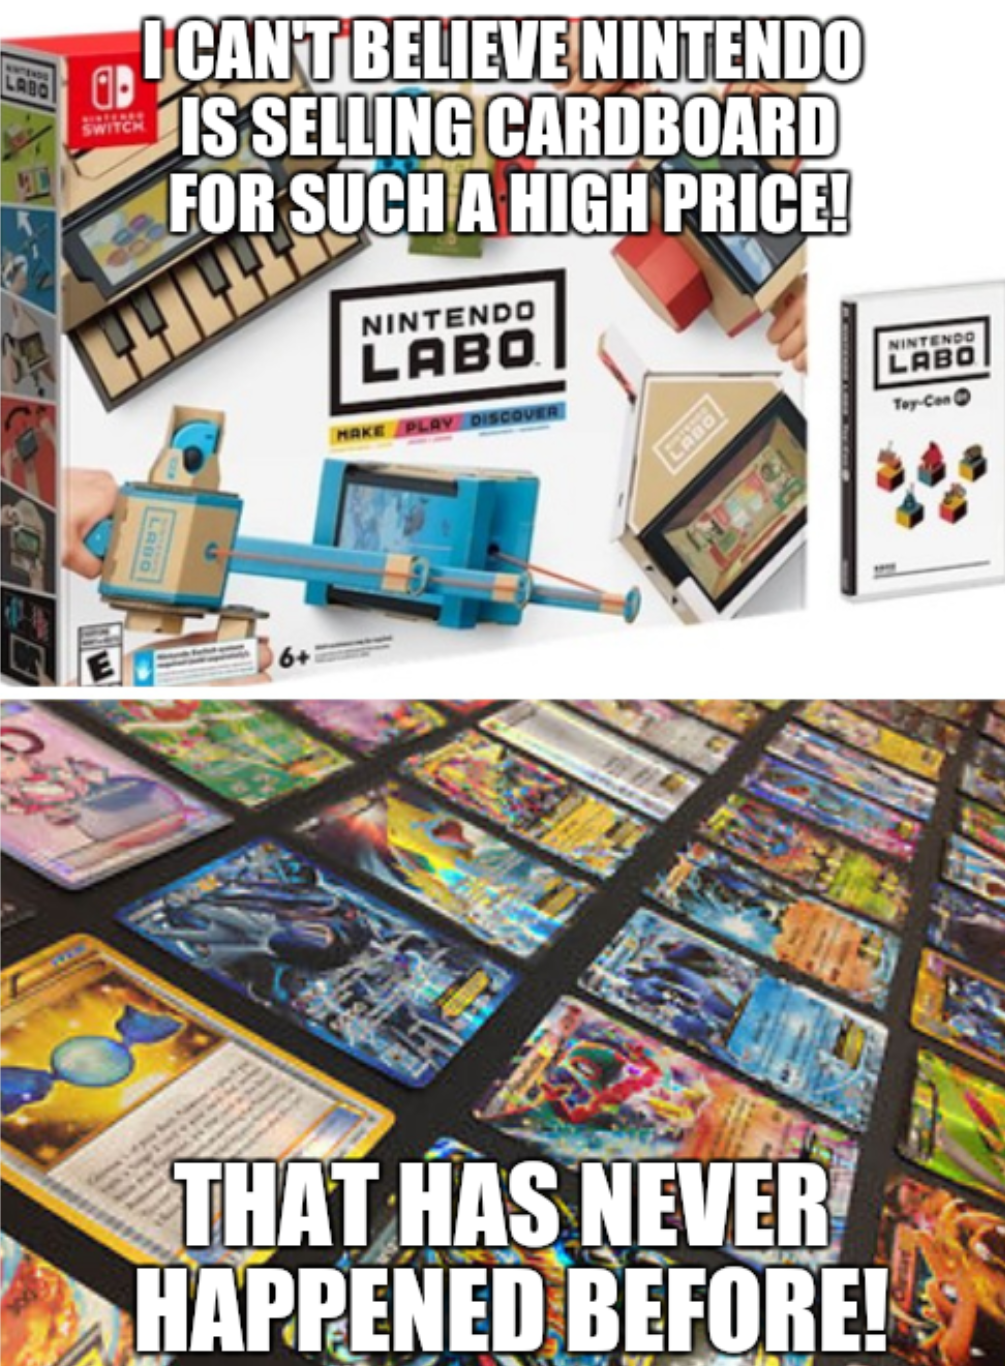 nintendo labo pegi - Icant Believe Nintendo Is Selling Cardboard For Such A High Price! Lucan Nintendo Labo That Has Never Happened Before!